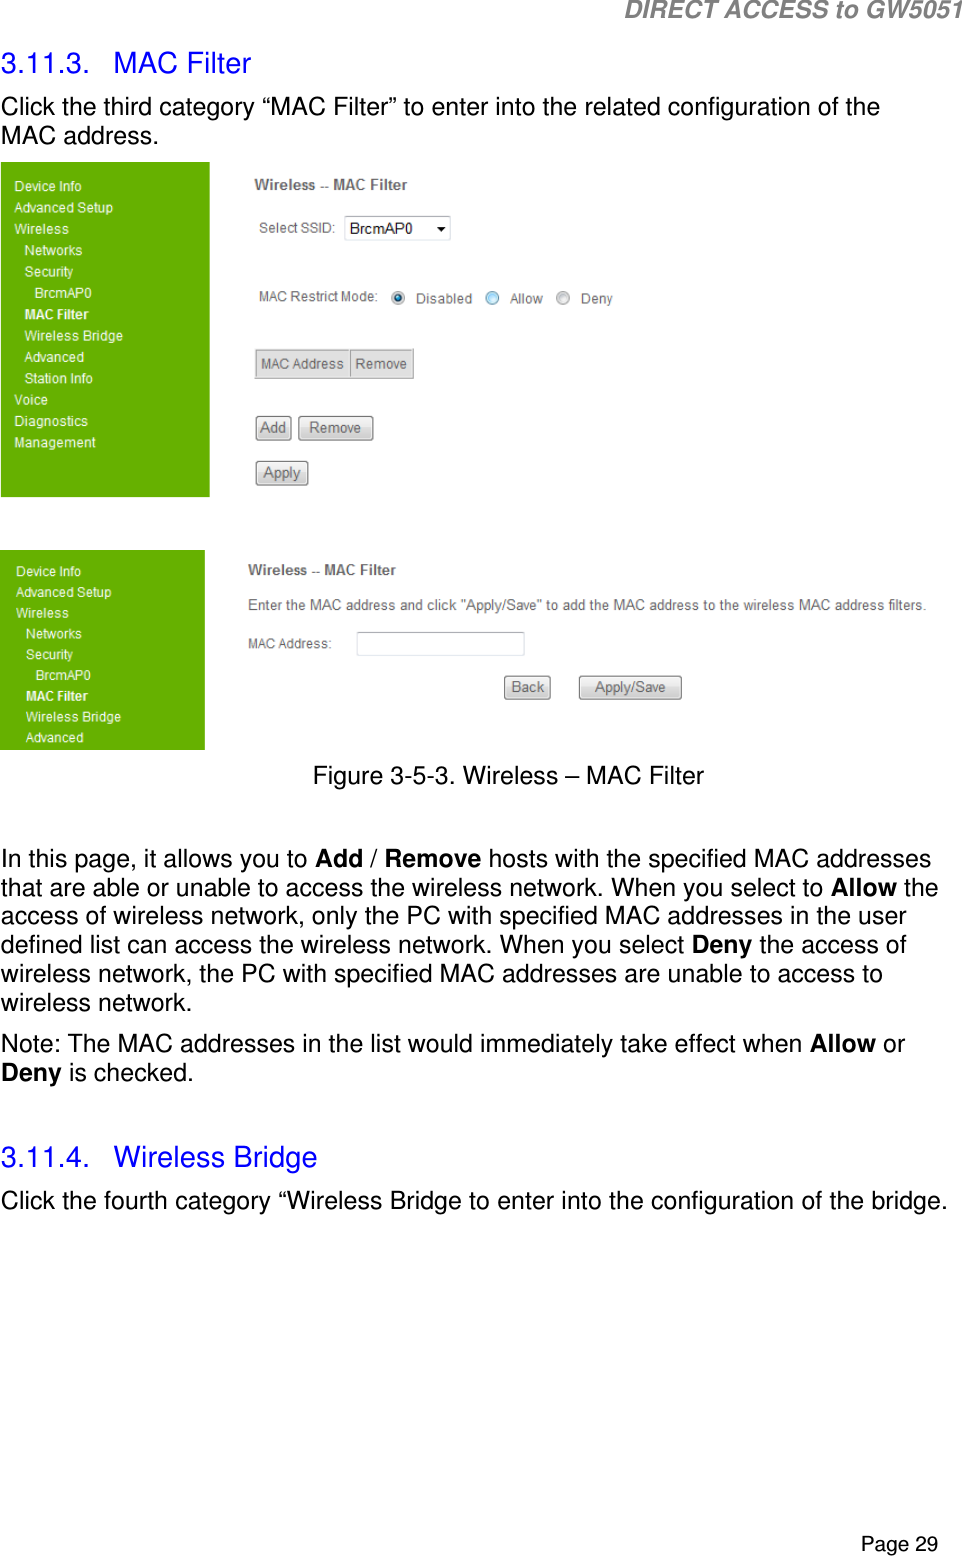                                                                                                                                                                                                                           DIRECT ACCESS to GW5051    Page 29 3.11.3.  MAC Filter Click the third category “MAC Filter” to enter into the related configuration of the MAC address.    Figure 3-5-3. Wireless – MAC Filter  In this page, it allows you to Add / Remove hosts with the specified MAC addresses that are able or unable to access the wireless network. When you select to Allow the access of wireless network, only the PC with specified MAC addresses in the user defined list can access the wireless network. When you select Deny the access of wireless network, the PC with specified MAC addresses are unable to access to wireless network.  Note: The MAC addresses in the list would immediately take effect when Allow or Deny is checked.   3.11.4.  Wireless Bridge Click the fourth category “Wireless Bridge to enter into the configuration of the bridge.  